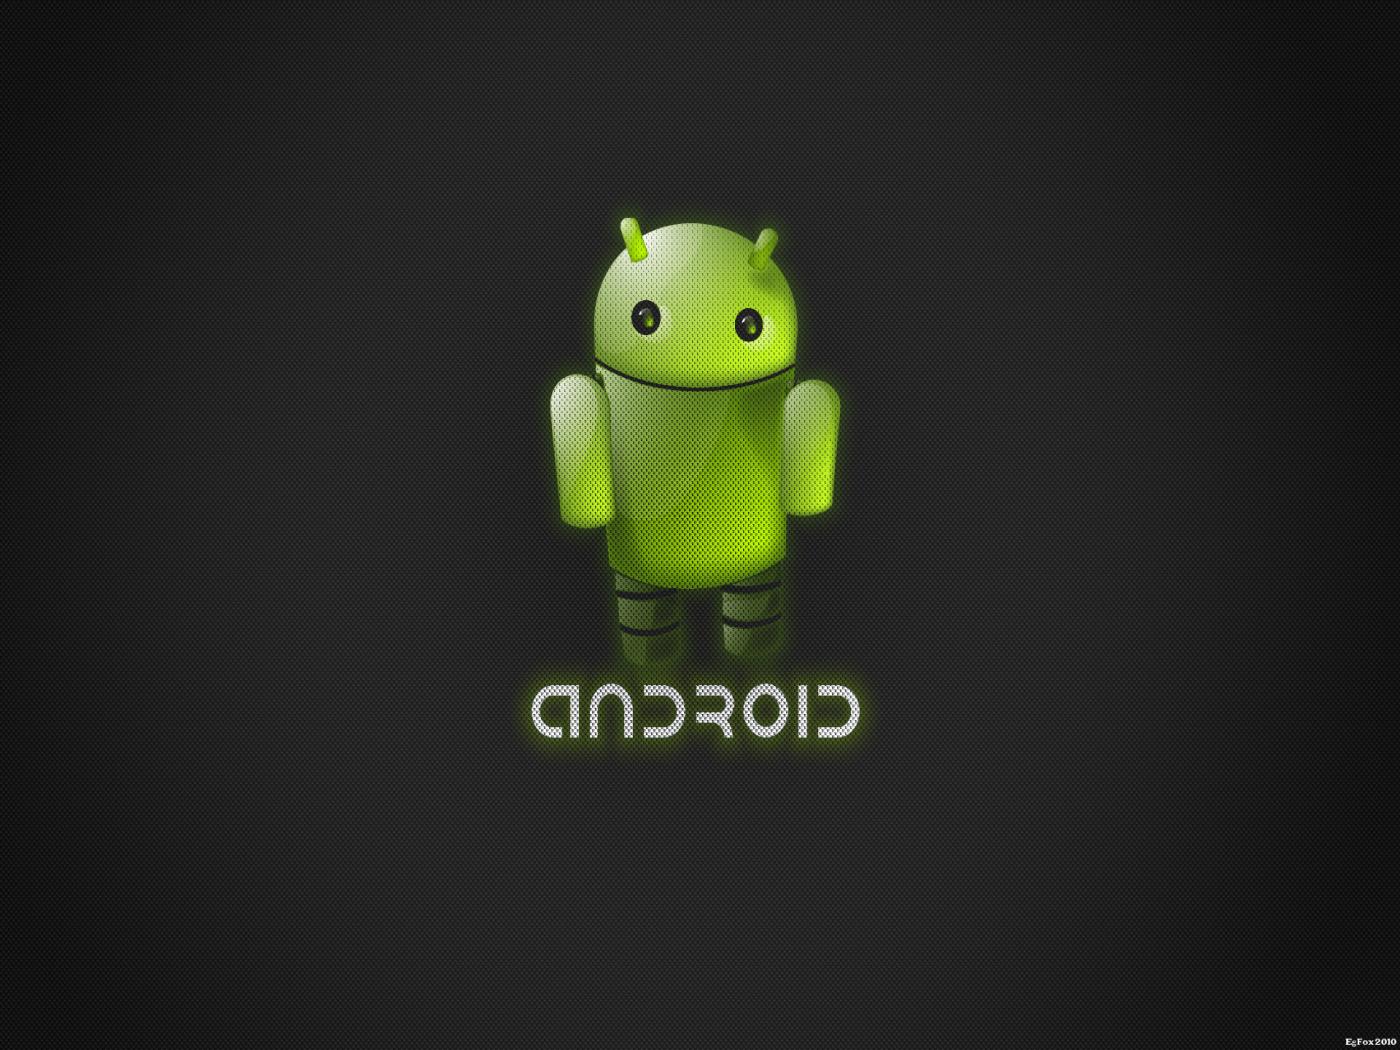 Android Eat Apple wallpaper by djbattery2012 - Download on ZEDGE™ | e4e2